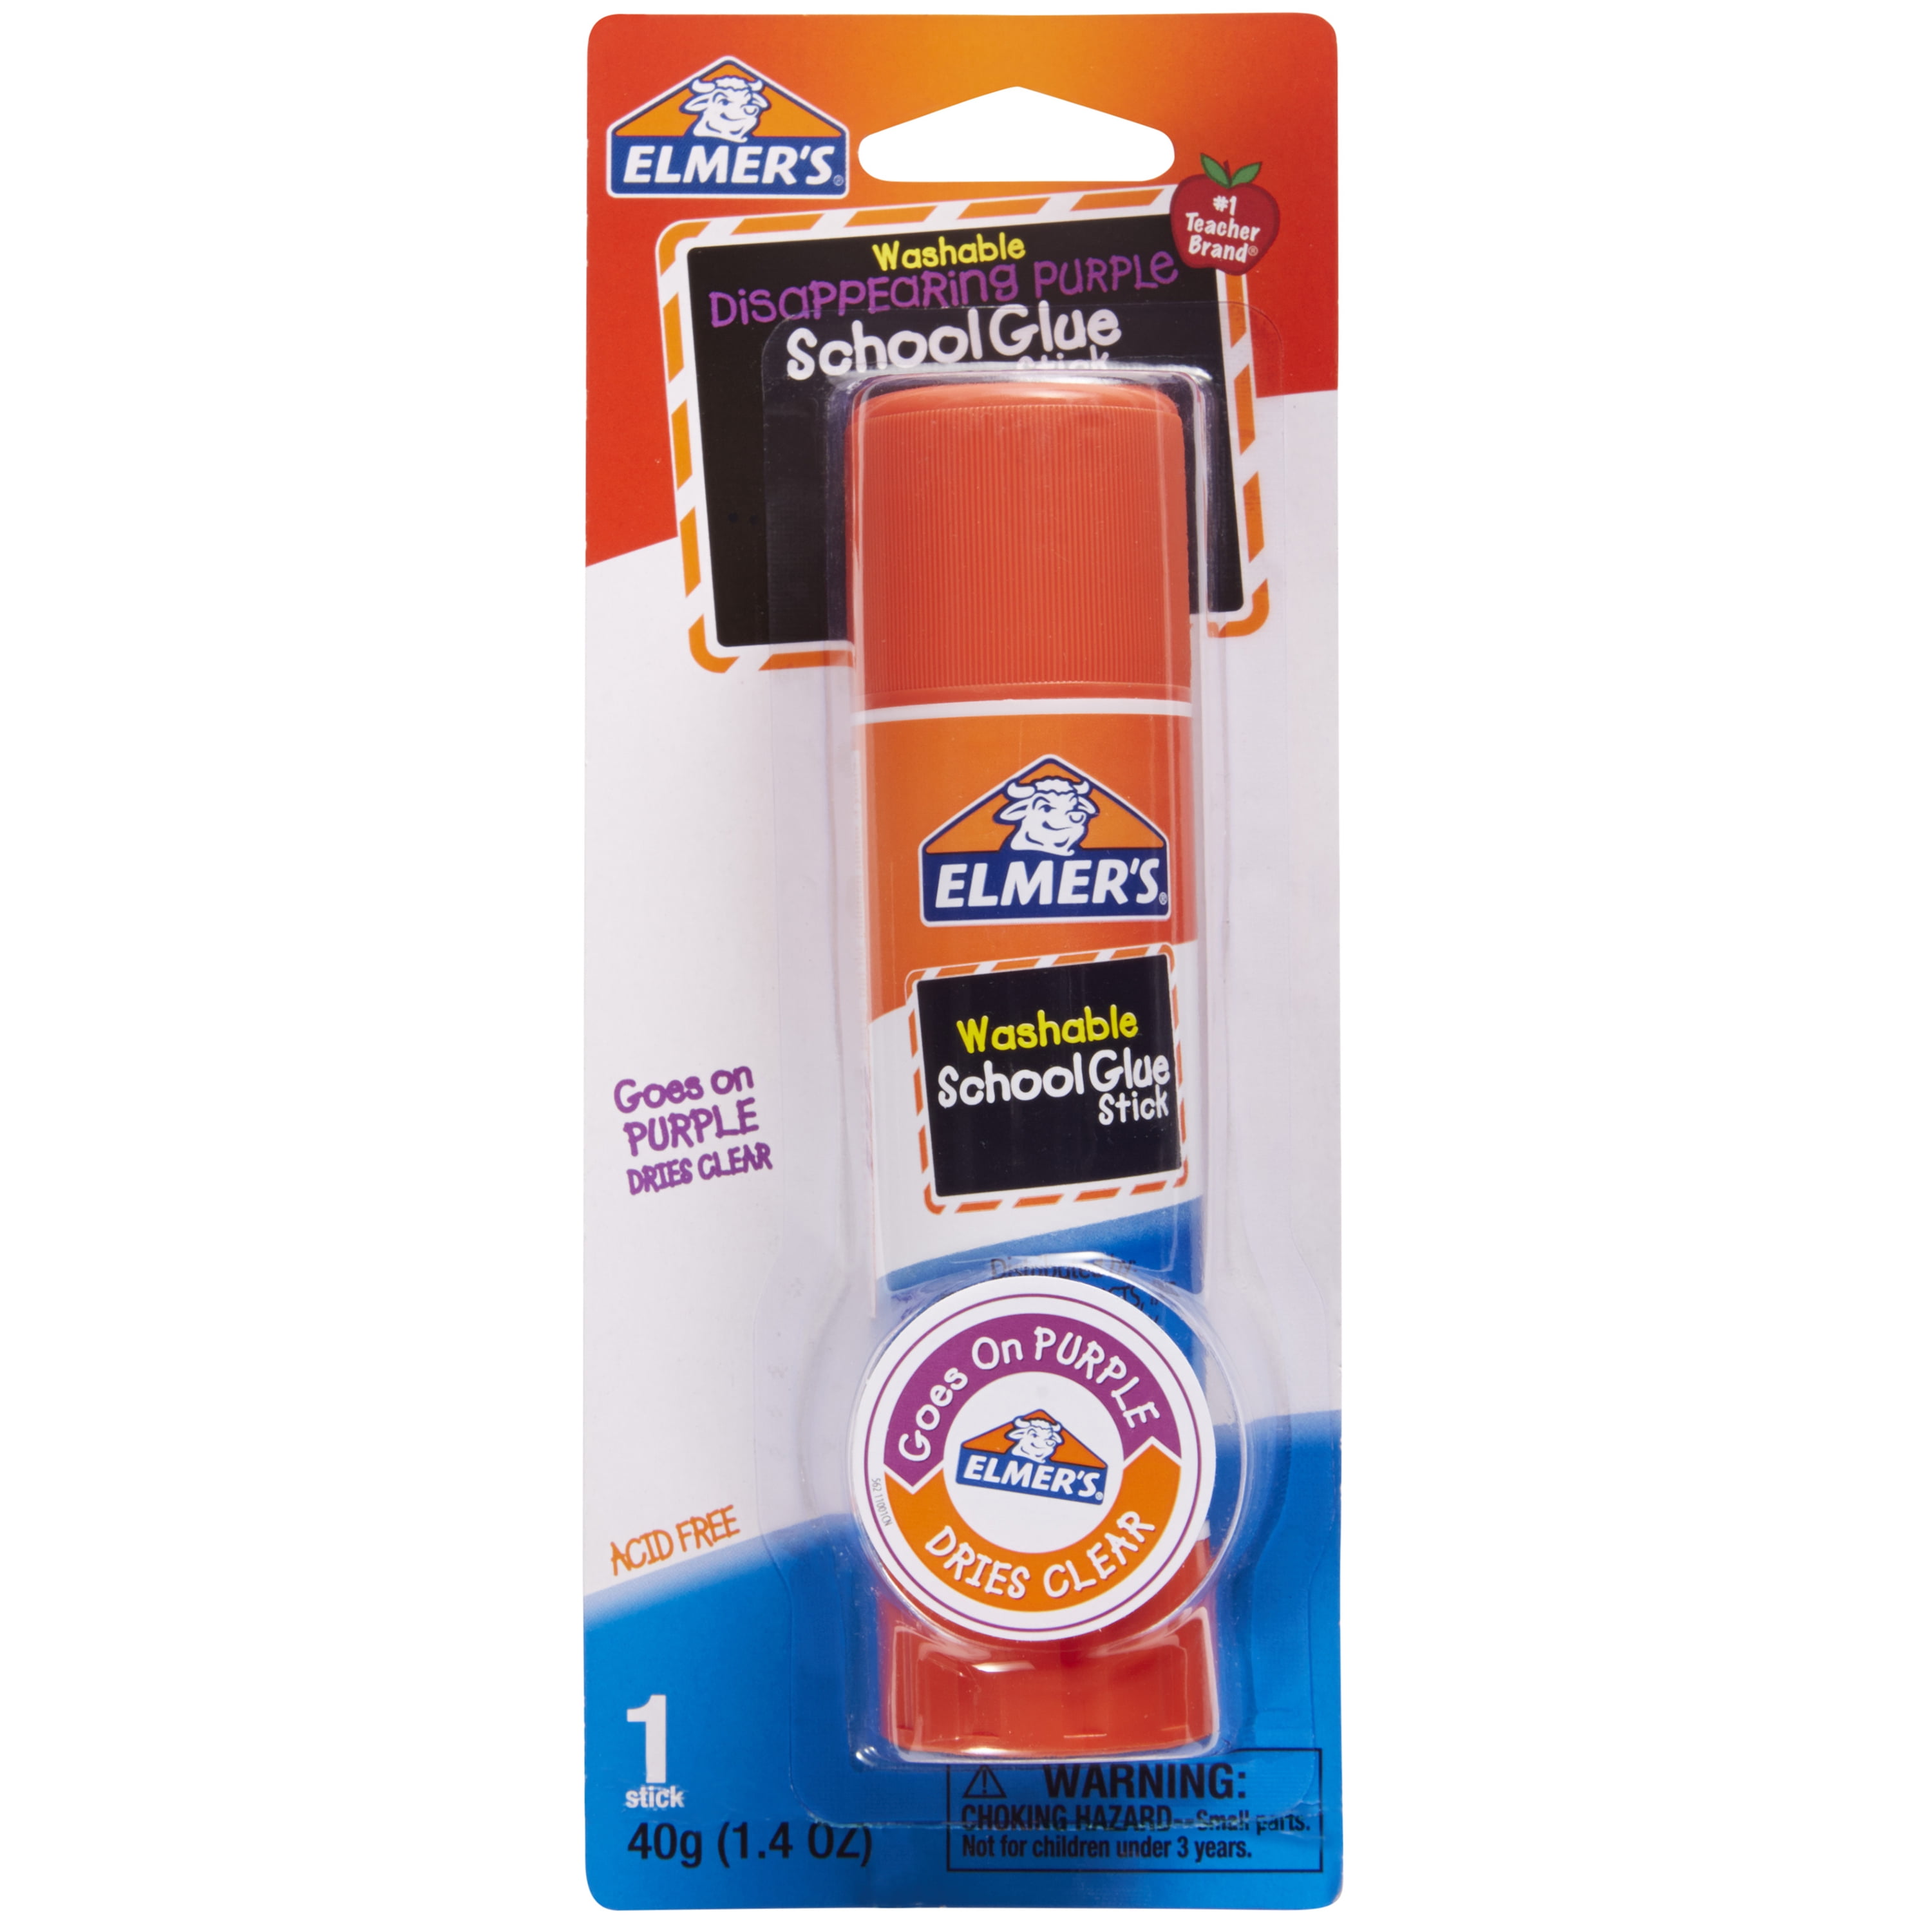 Elmer's Disappearing Purple Glue Jumbo Stick 3-Pack Only $2.48